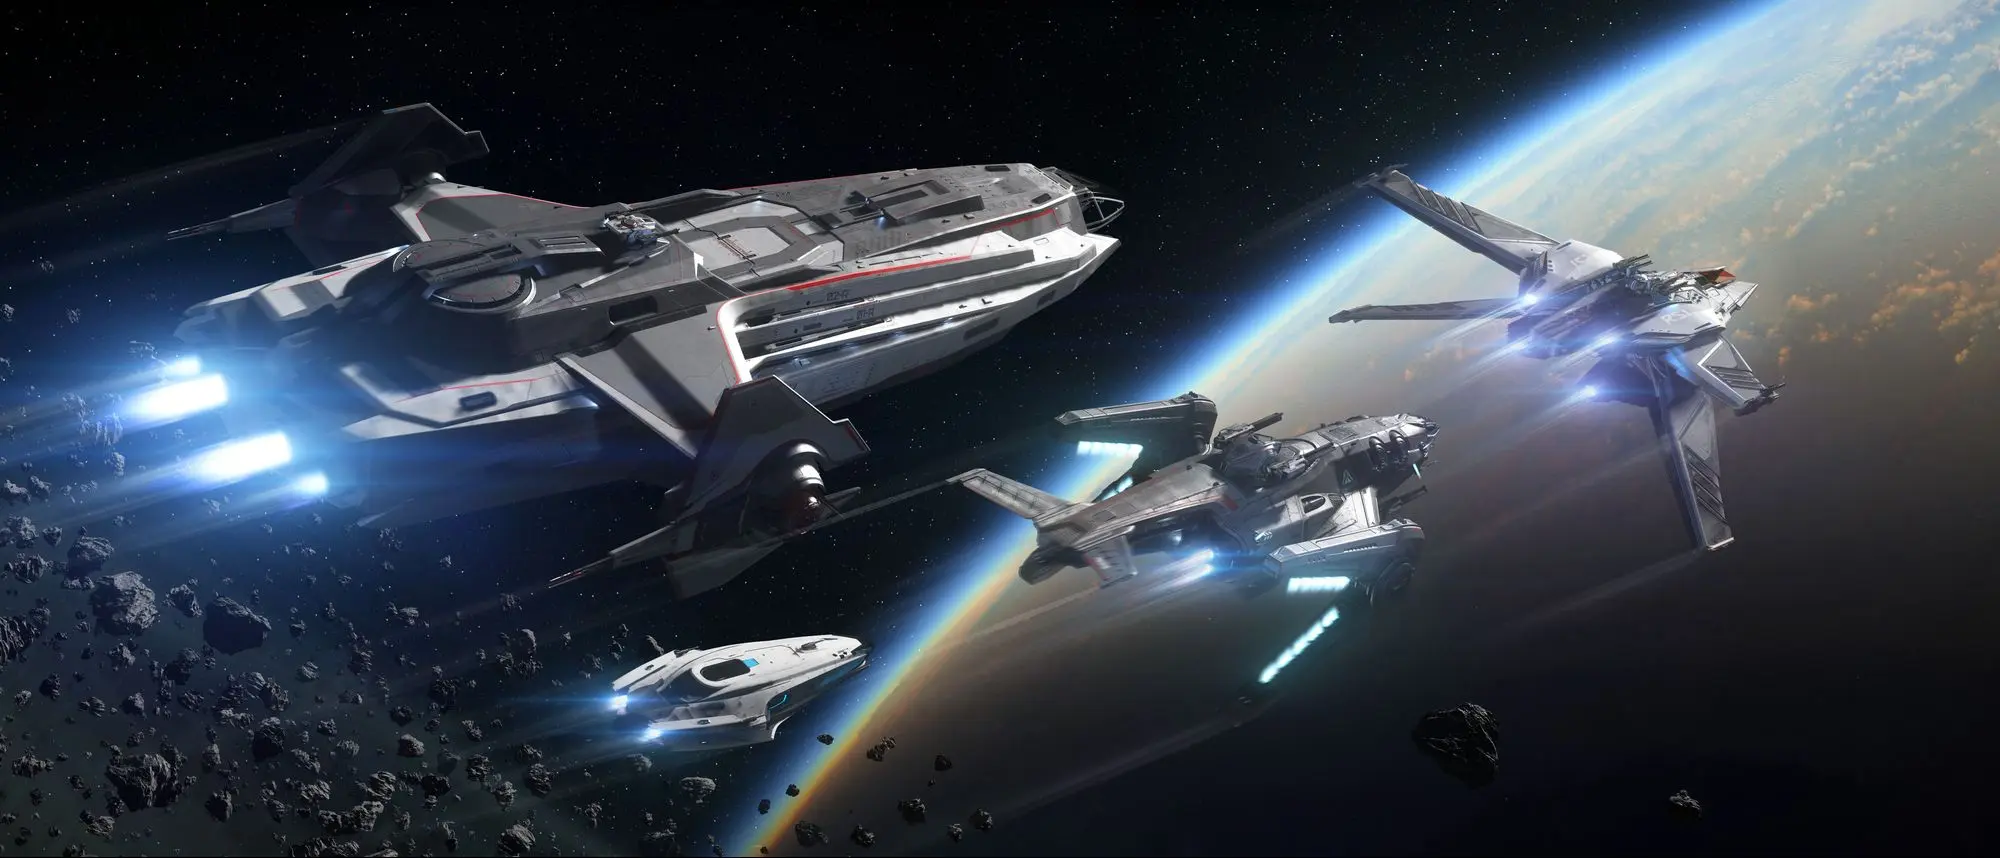 Star Citizen will let you fly over 100 ships freely for the next 2 weeks